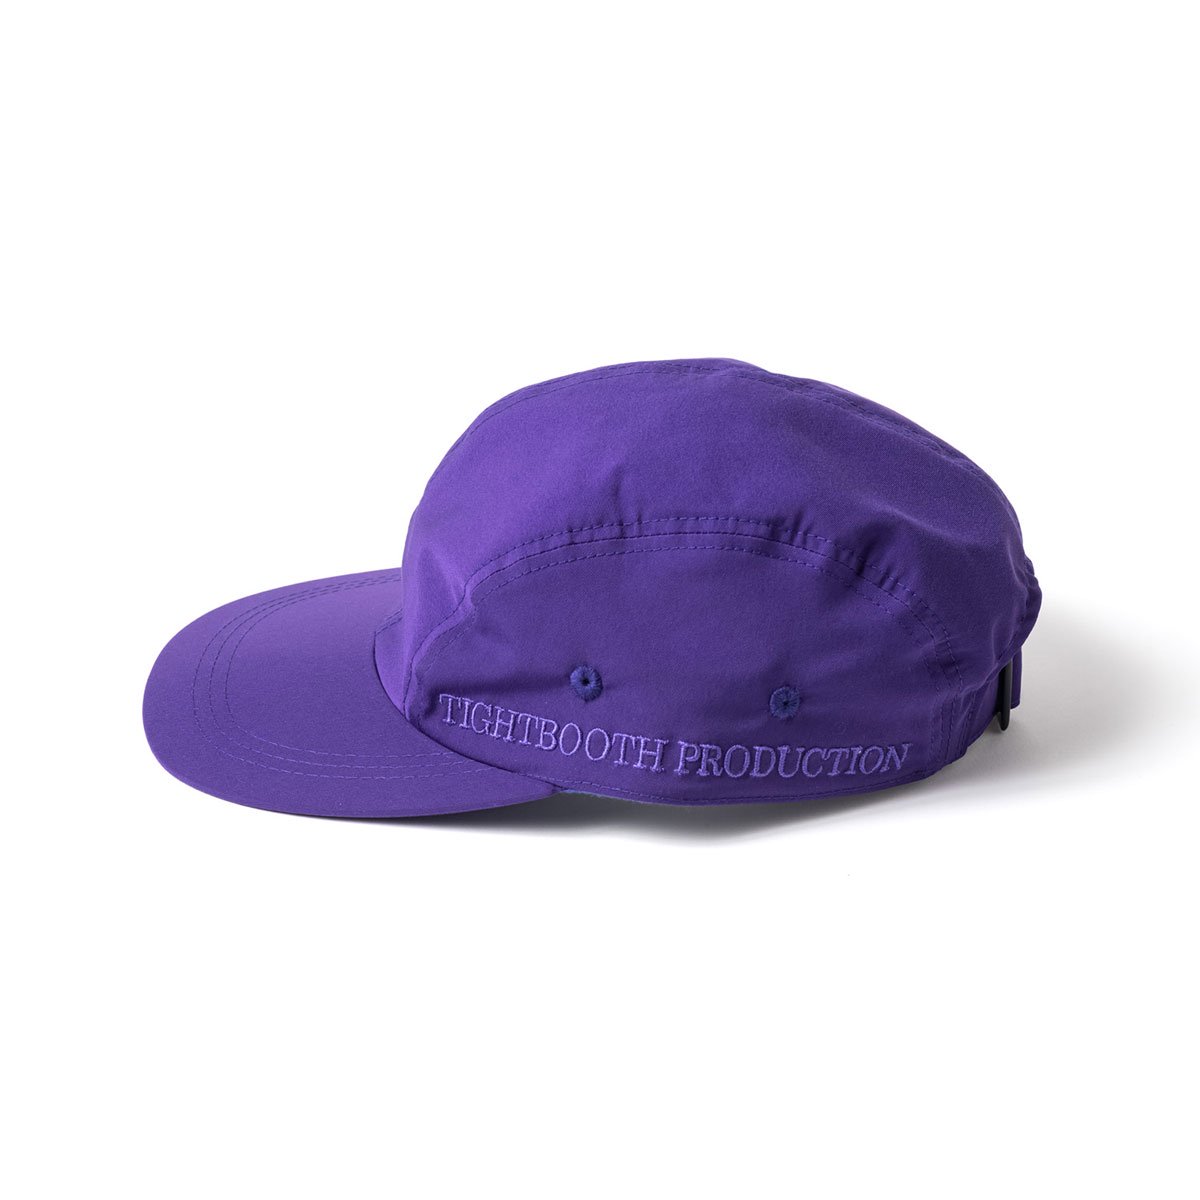 SIDE LOGO CAMP CAP - TIGHTBOOTH PRODUCTION